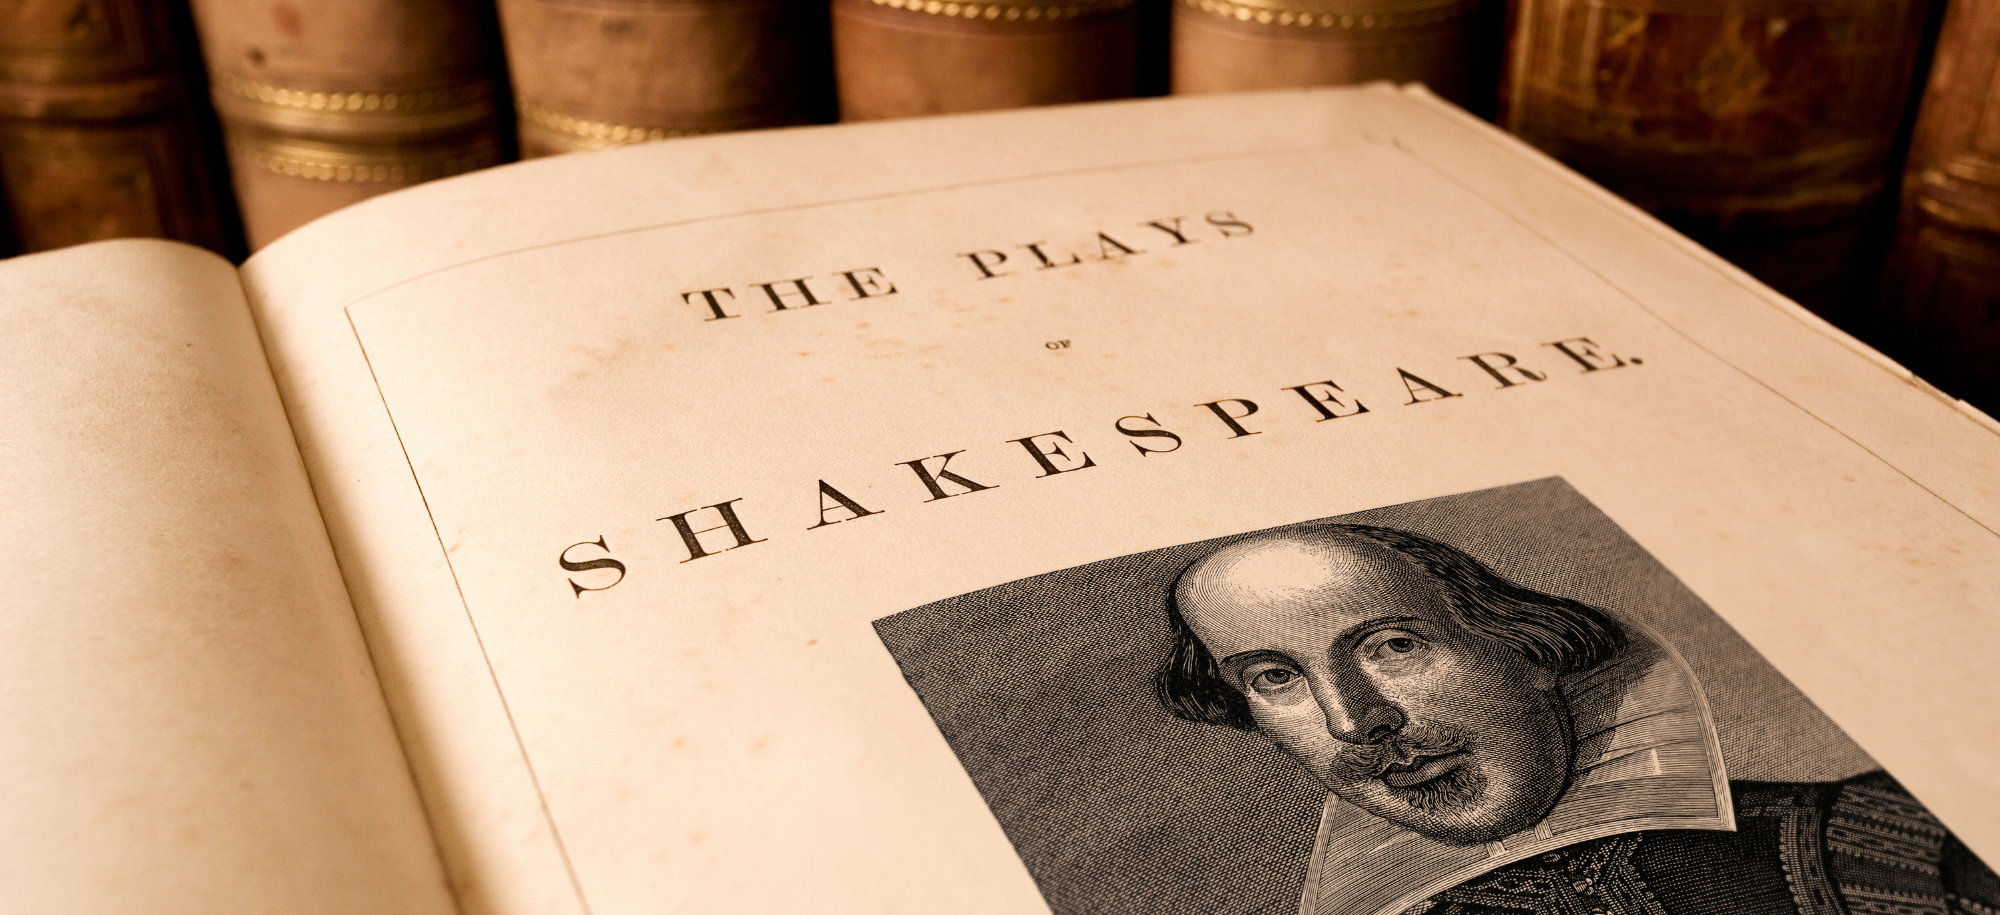 Image showing book of Shakespeare plays open with image of Shakespeare